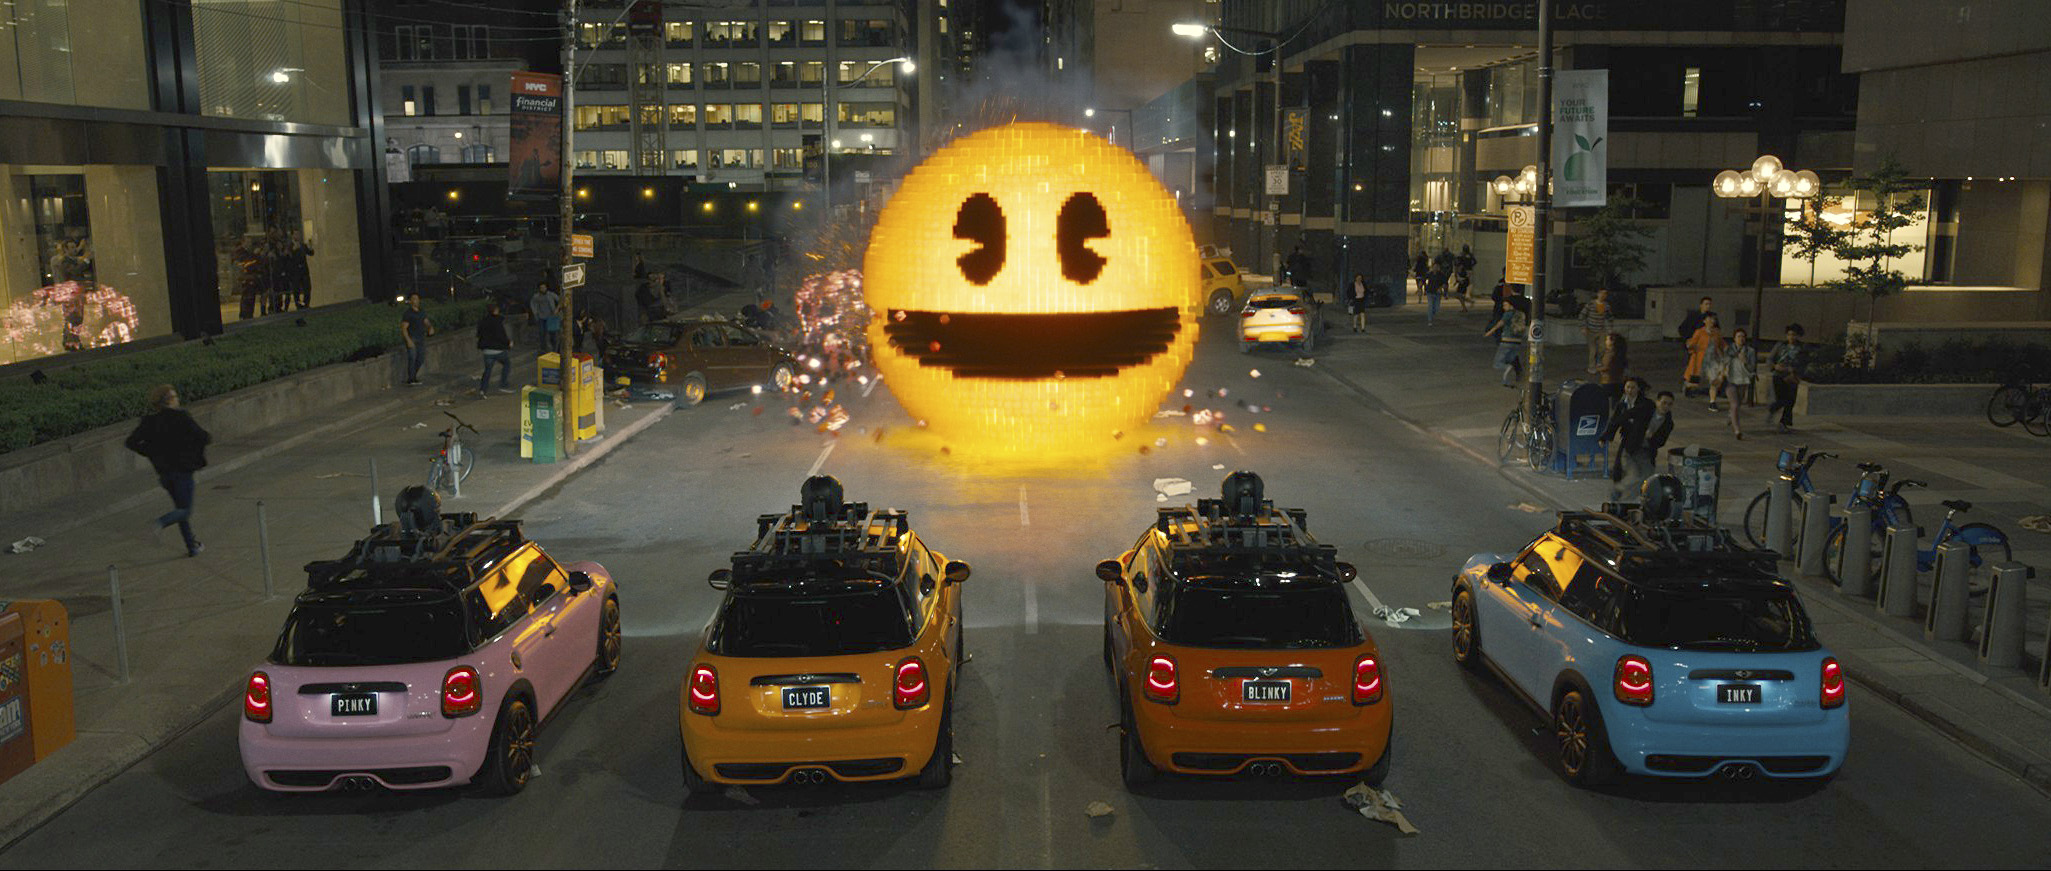 Inky, Blinky, Clyde and Pinky are seen in Columbia Pictures' 'Pixels.' The movie opened in U.S. theaters on Friday. Sony Pictures Entertainment is accused of sanitizing the film to get it past Chinese censors. | AP